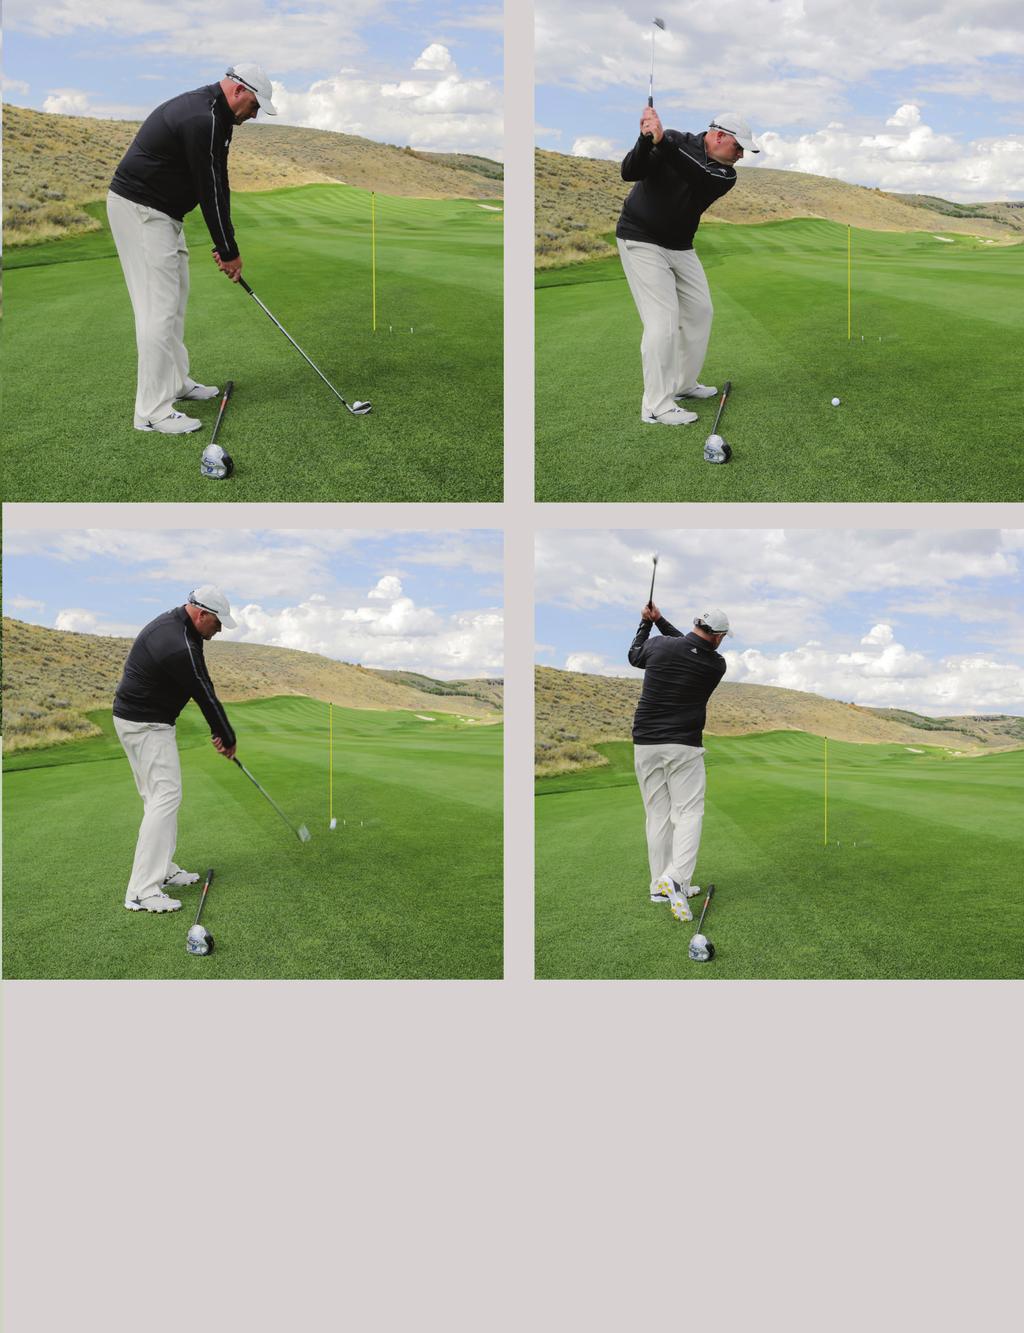 How you align your shots is critical, too. If you don t align your body, clubface and swing path properly, you can kiss any chance at consistency goodbye.